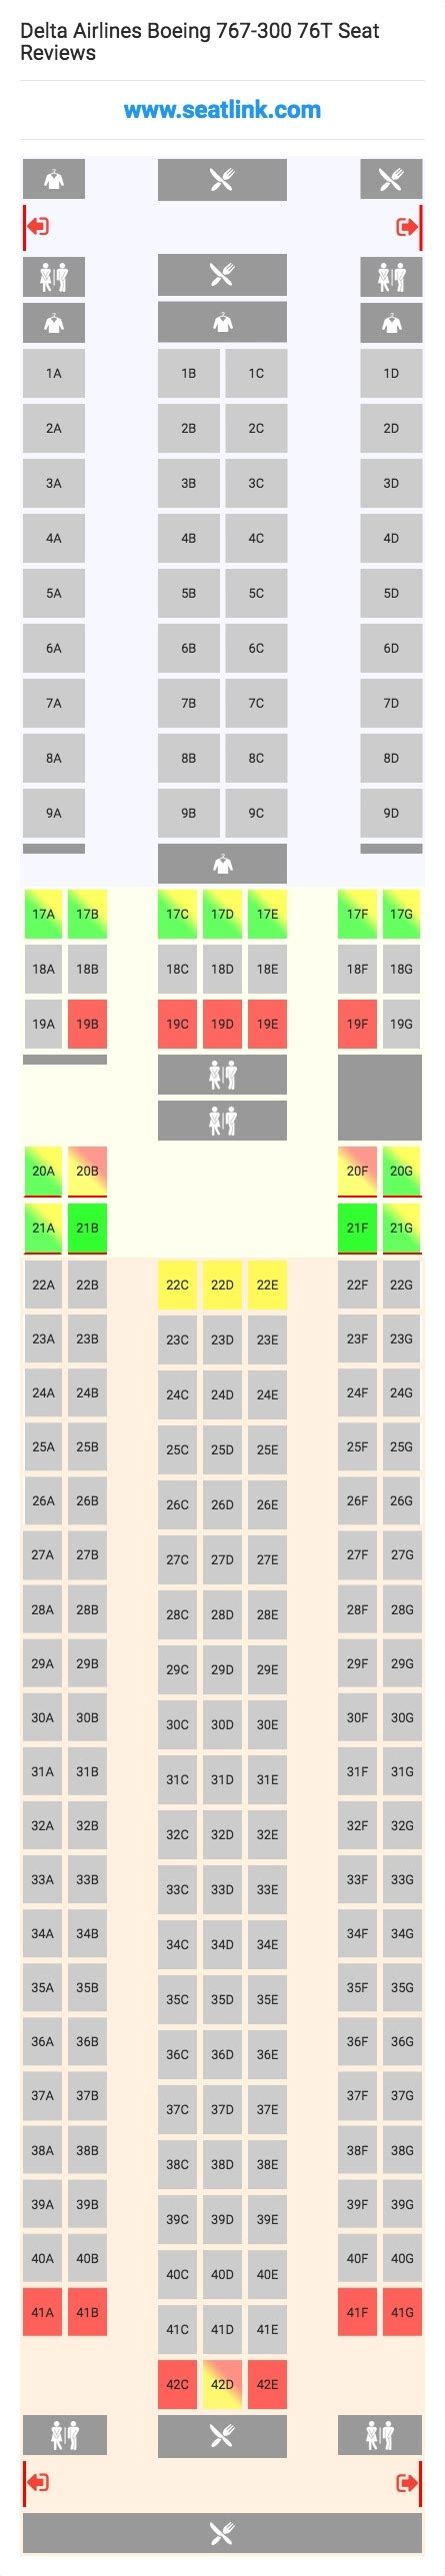 Pics Delta Airlines Seating Chart W And Review Alqu Blog